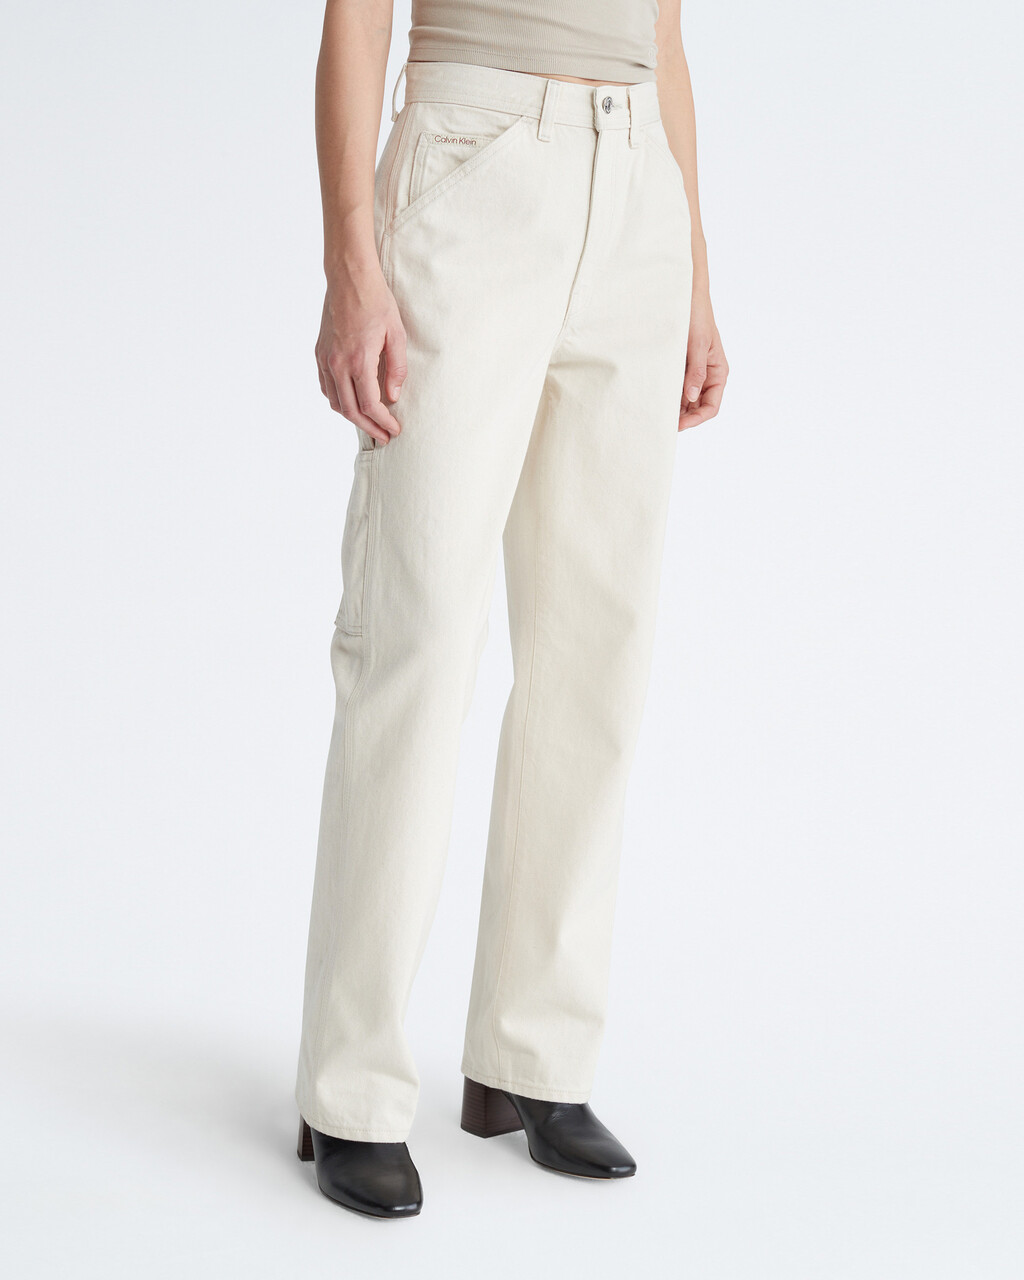 Tapered Fit Utility Jeans, RAW RINSE, hi-res